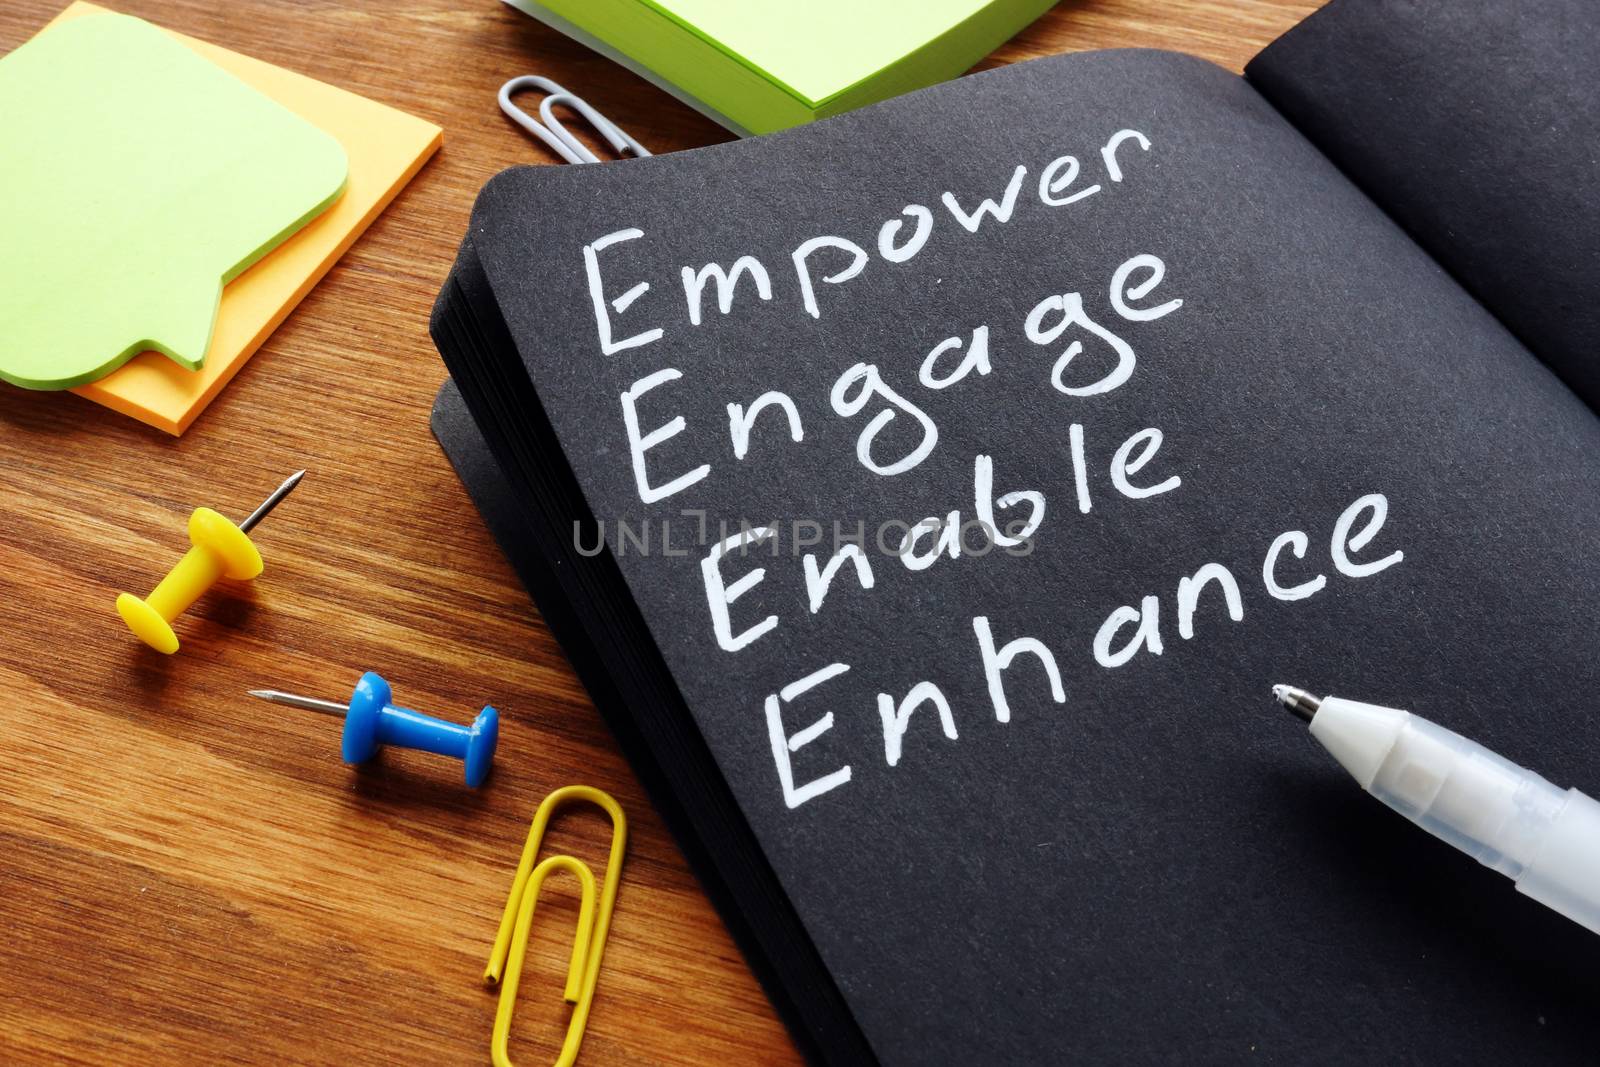 Empower engage enable enhance words written in the notepad.